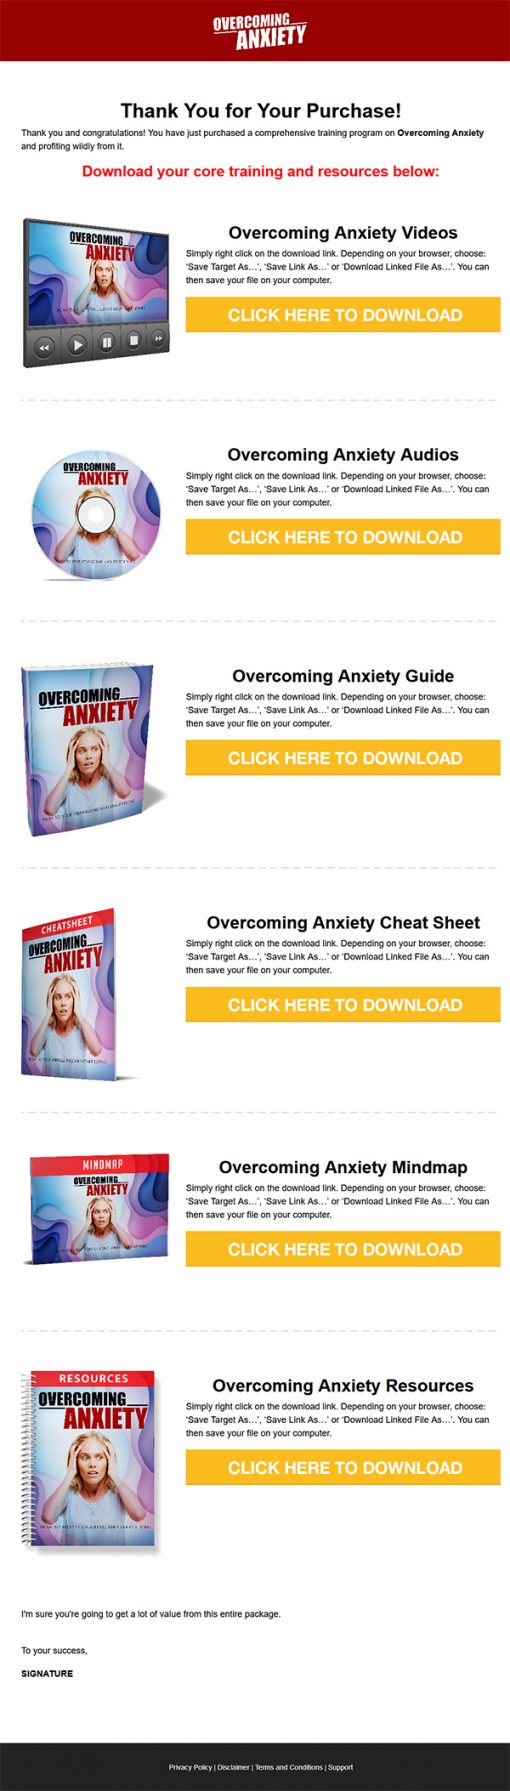 Overcoming Anxiety Ebook and Videos MRR